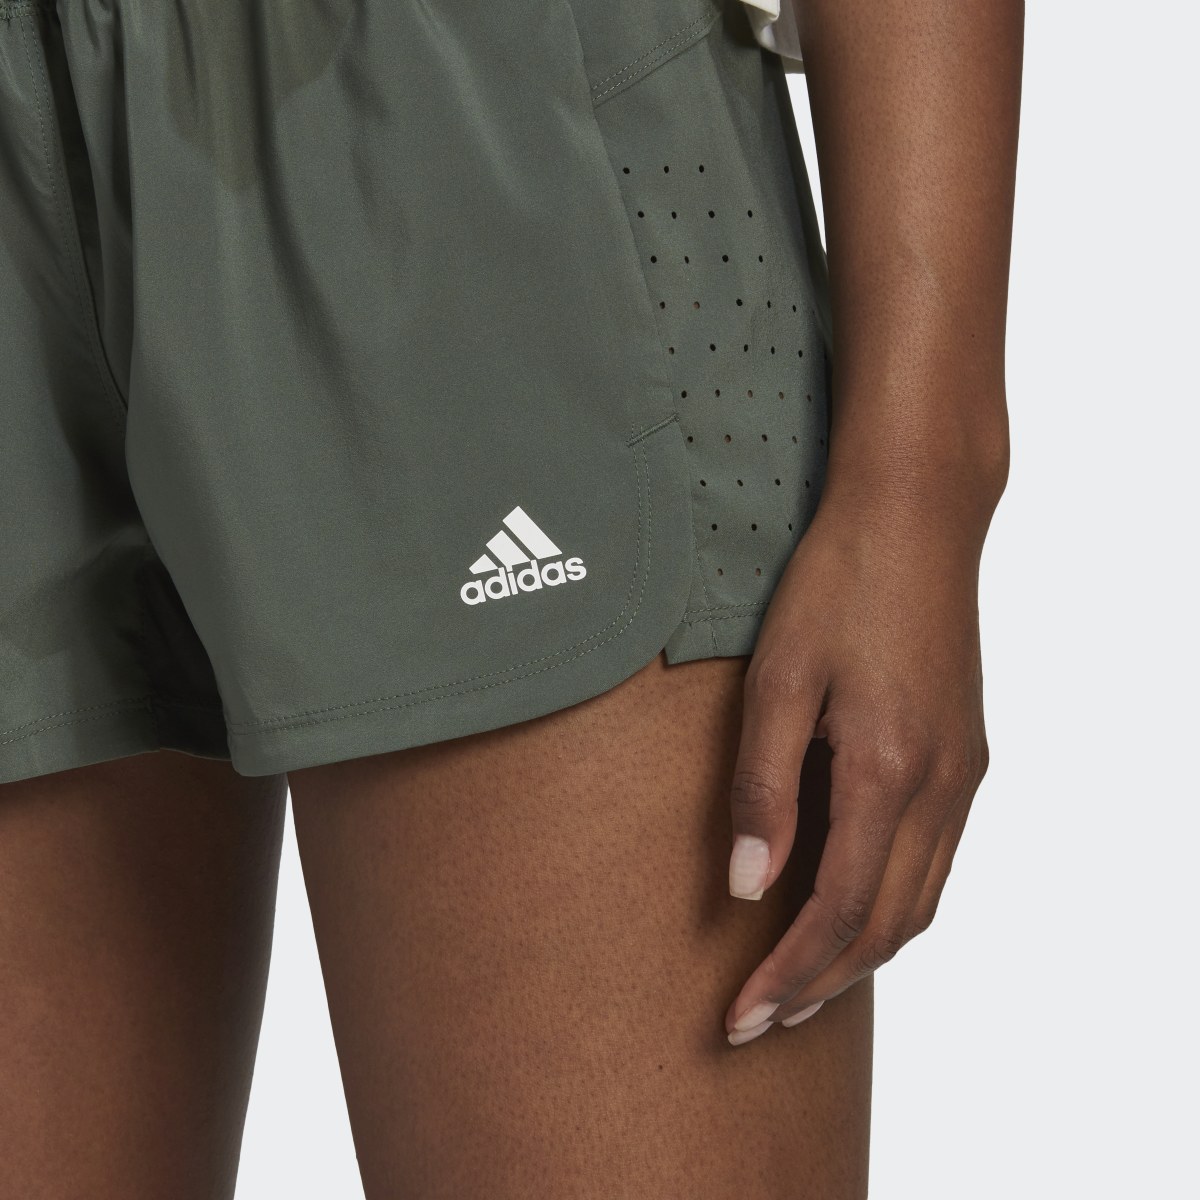 Adidas Perforated Pacer Shorts. 5